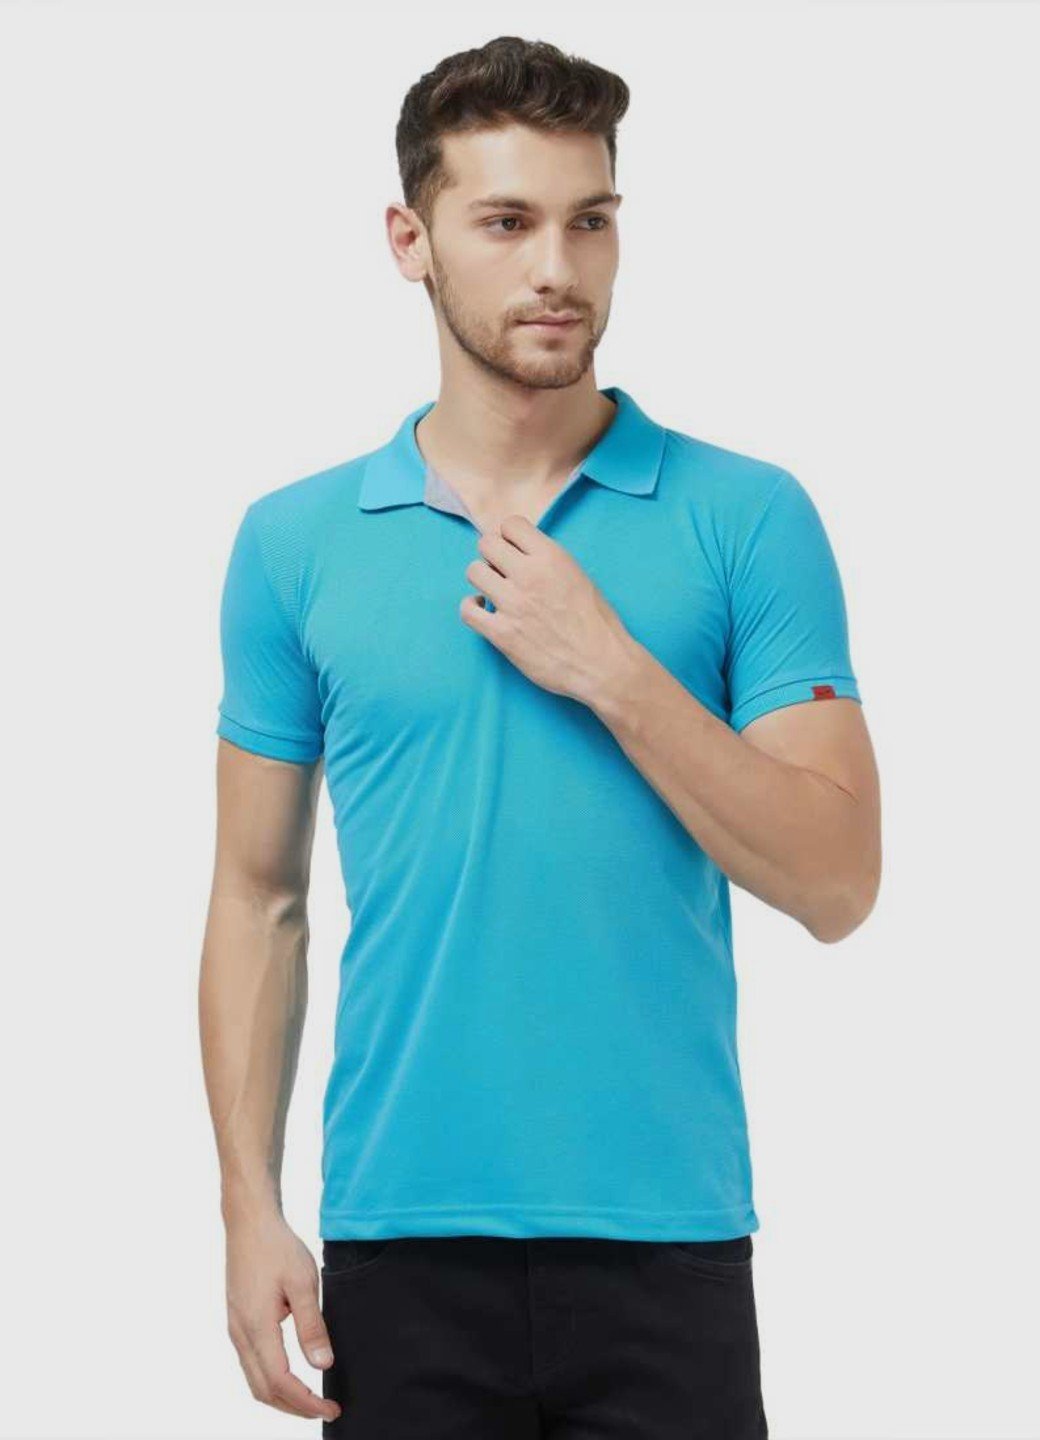 Turquoise polo t shirt